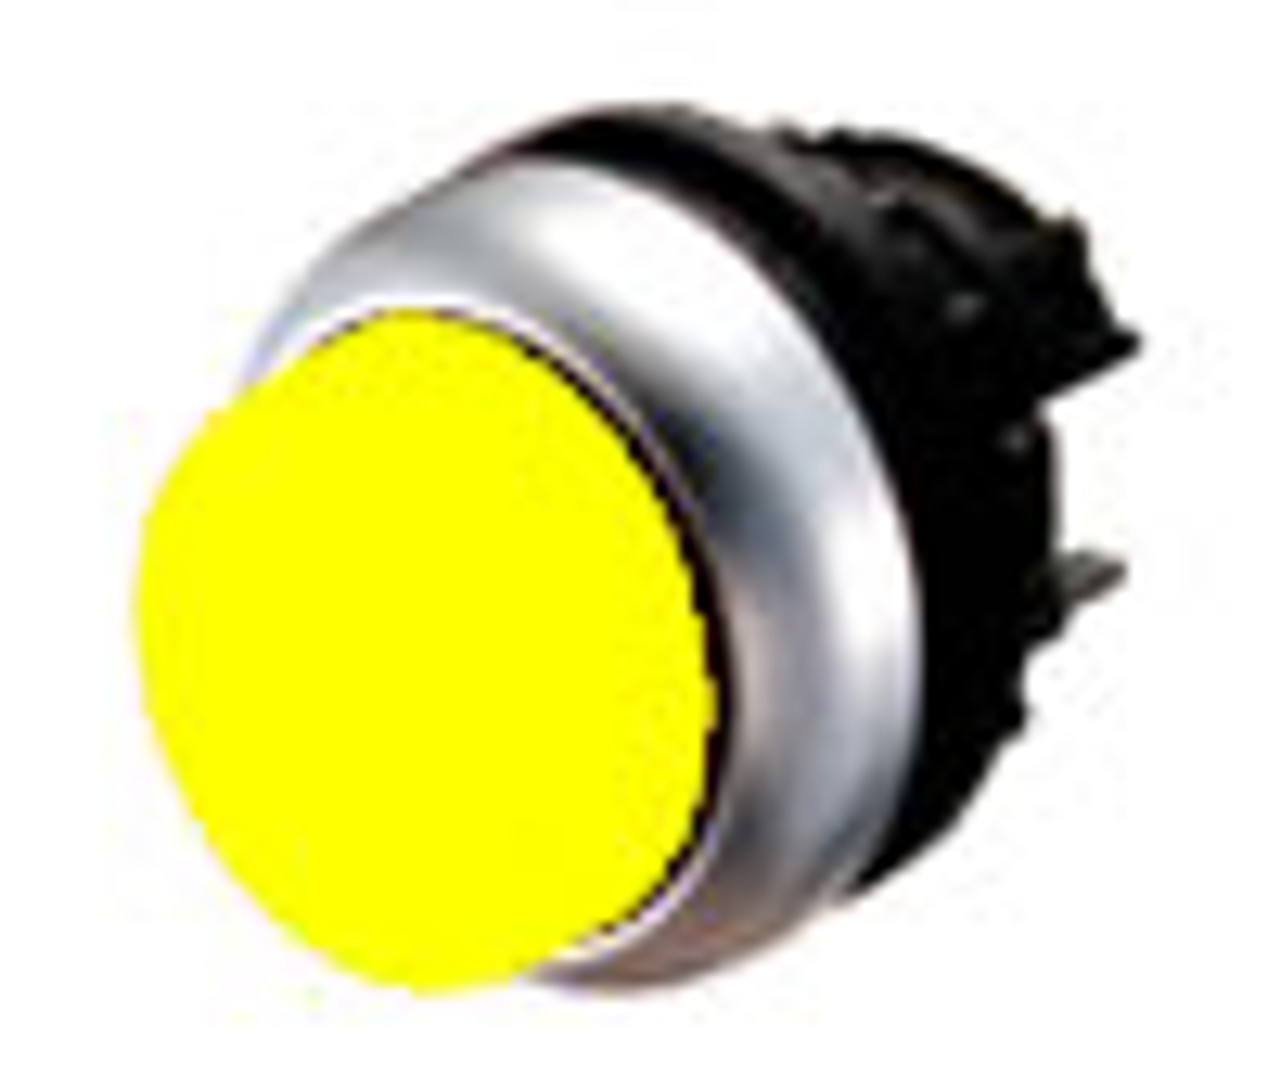 Moeller M22-DLH-Y yellow extended pushbutton